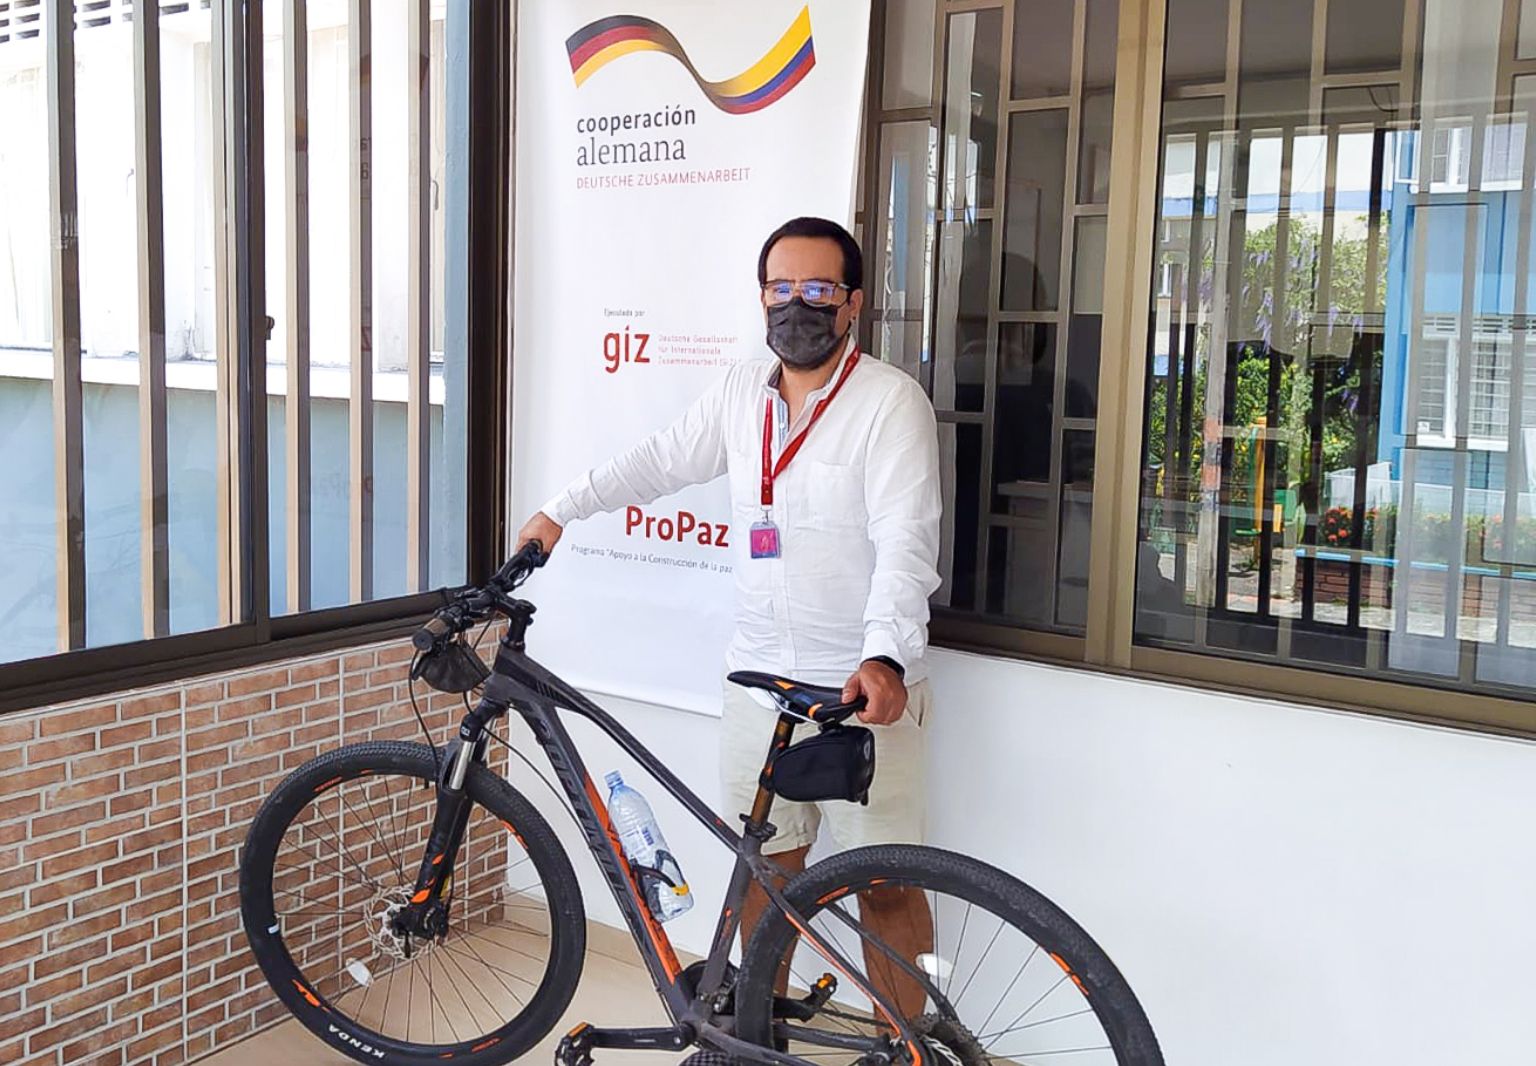 Photo: A man wearing a face mask standing in front of a building with the sign: ‘cooperación alemana, Deutsche Zusammenarbeit’ and the GIZ logo. A bicycle stands in front of him, which he is holding with both hands.